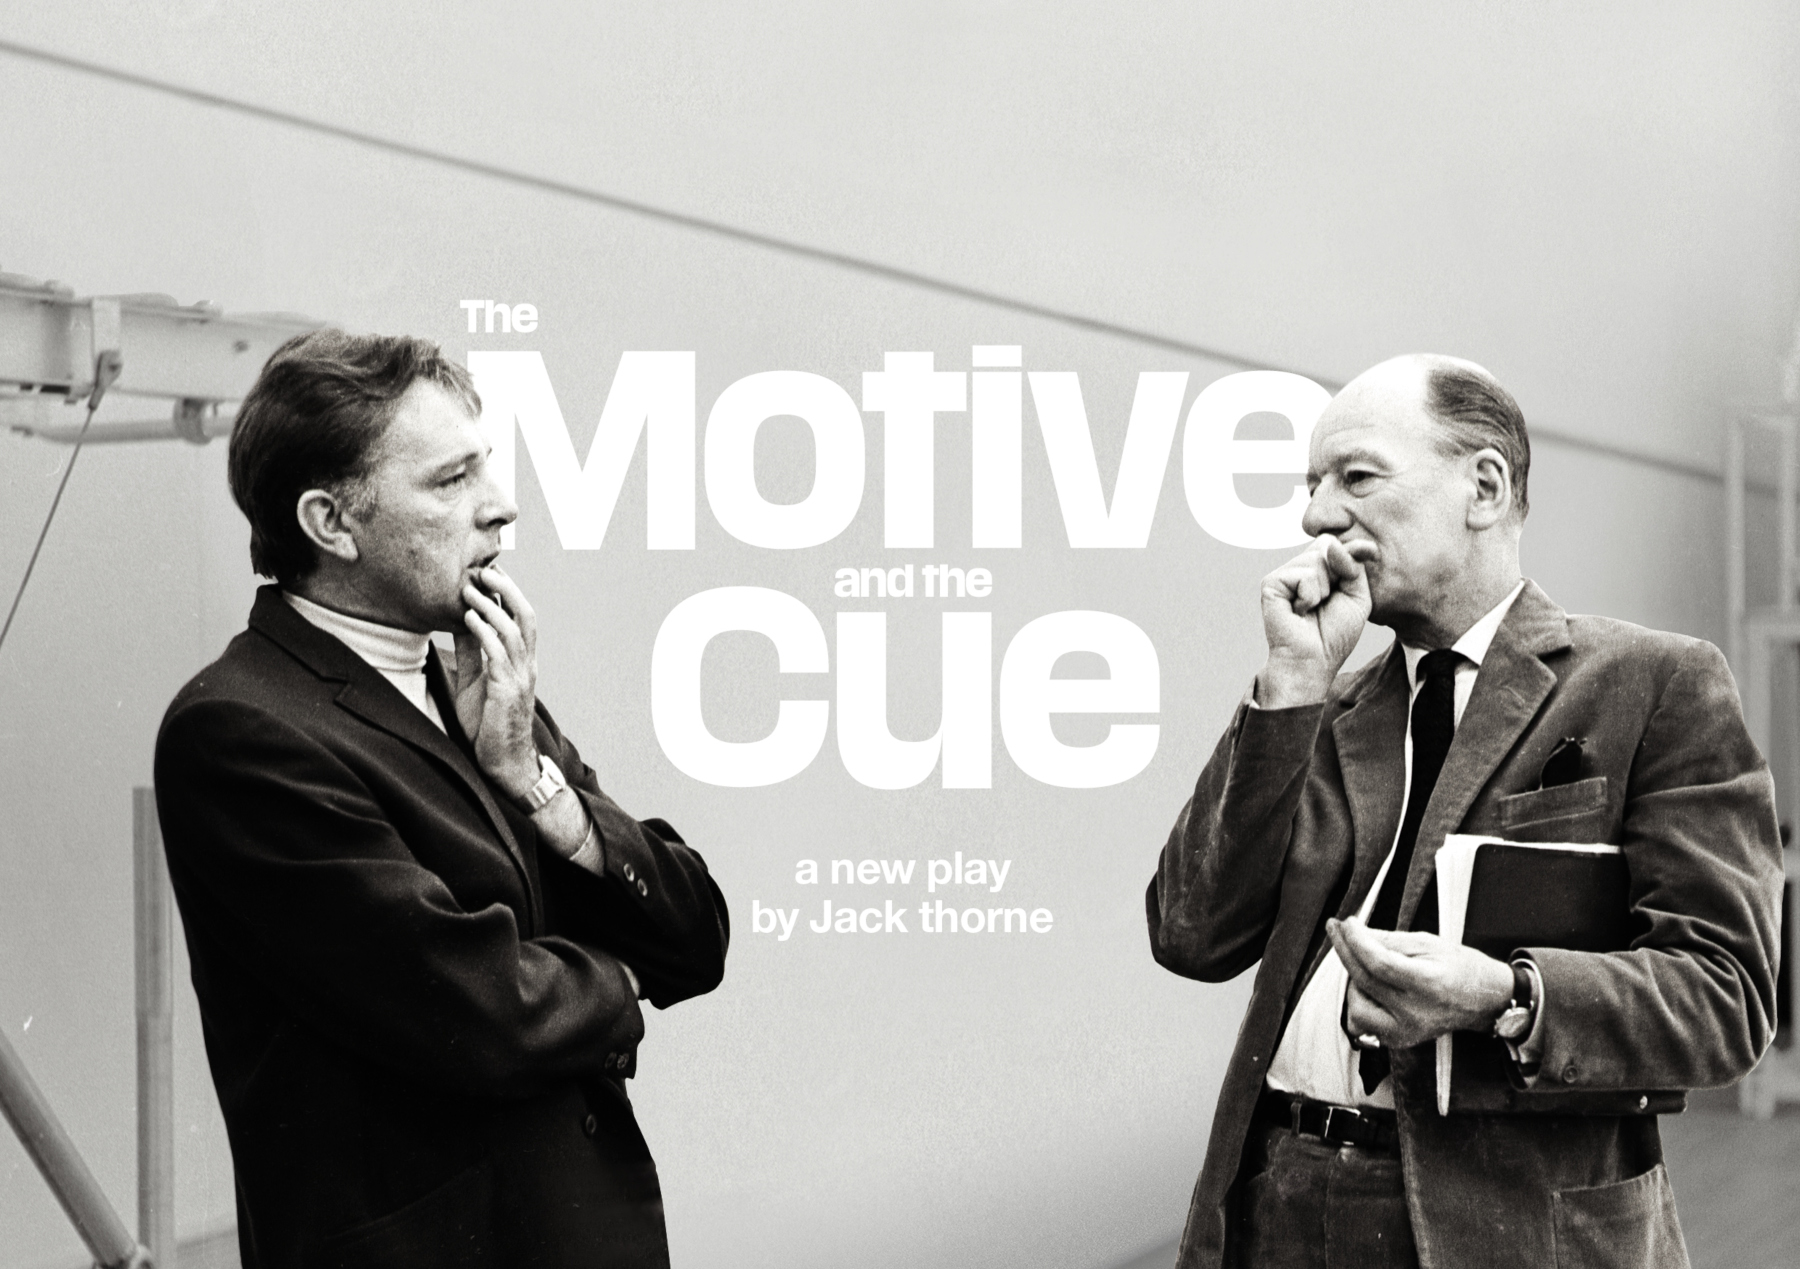 The Motive and the Cue